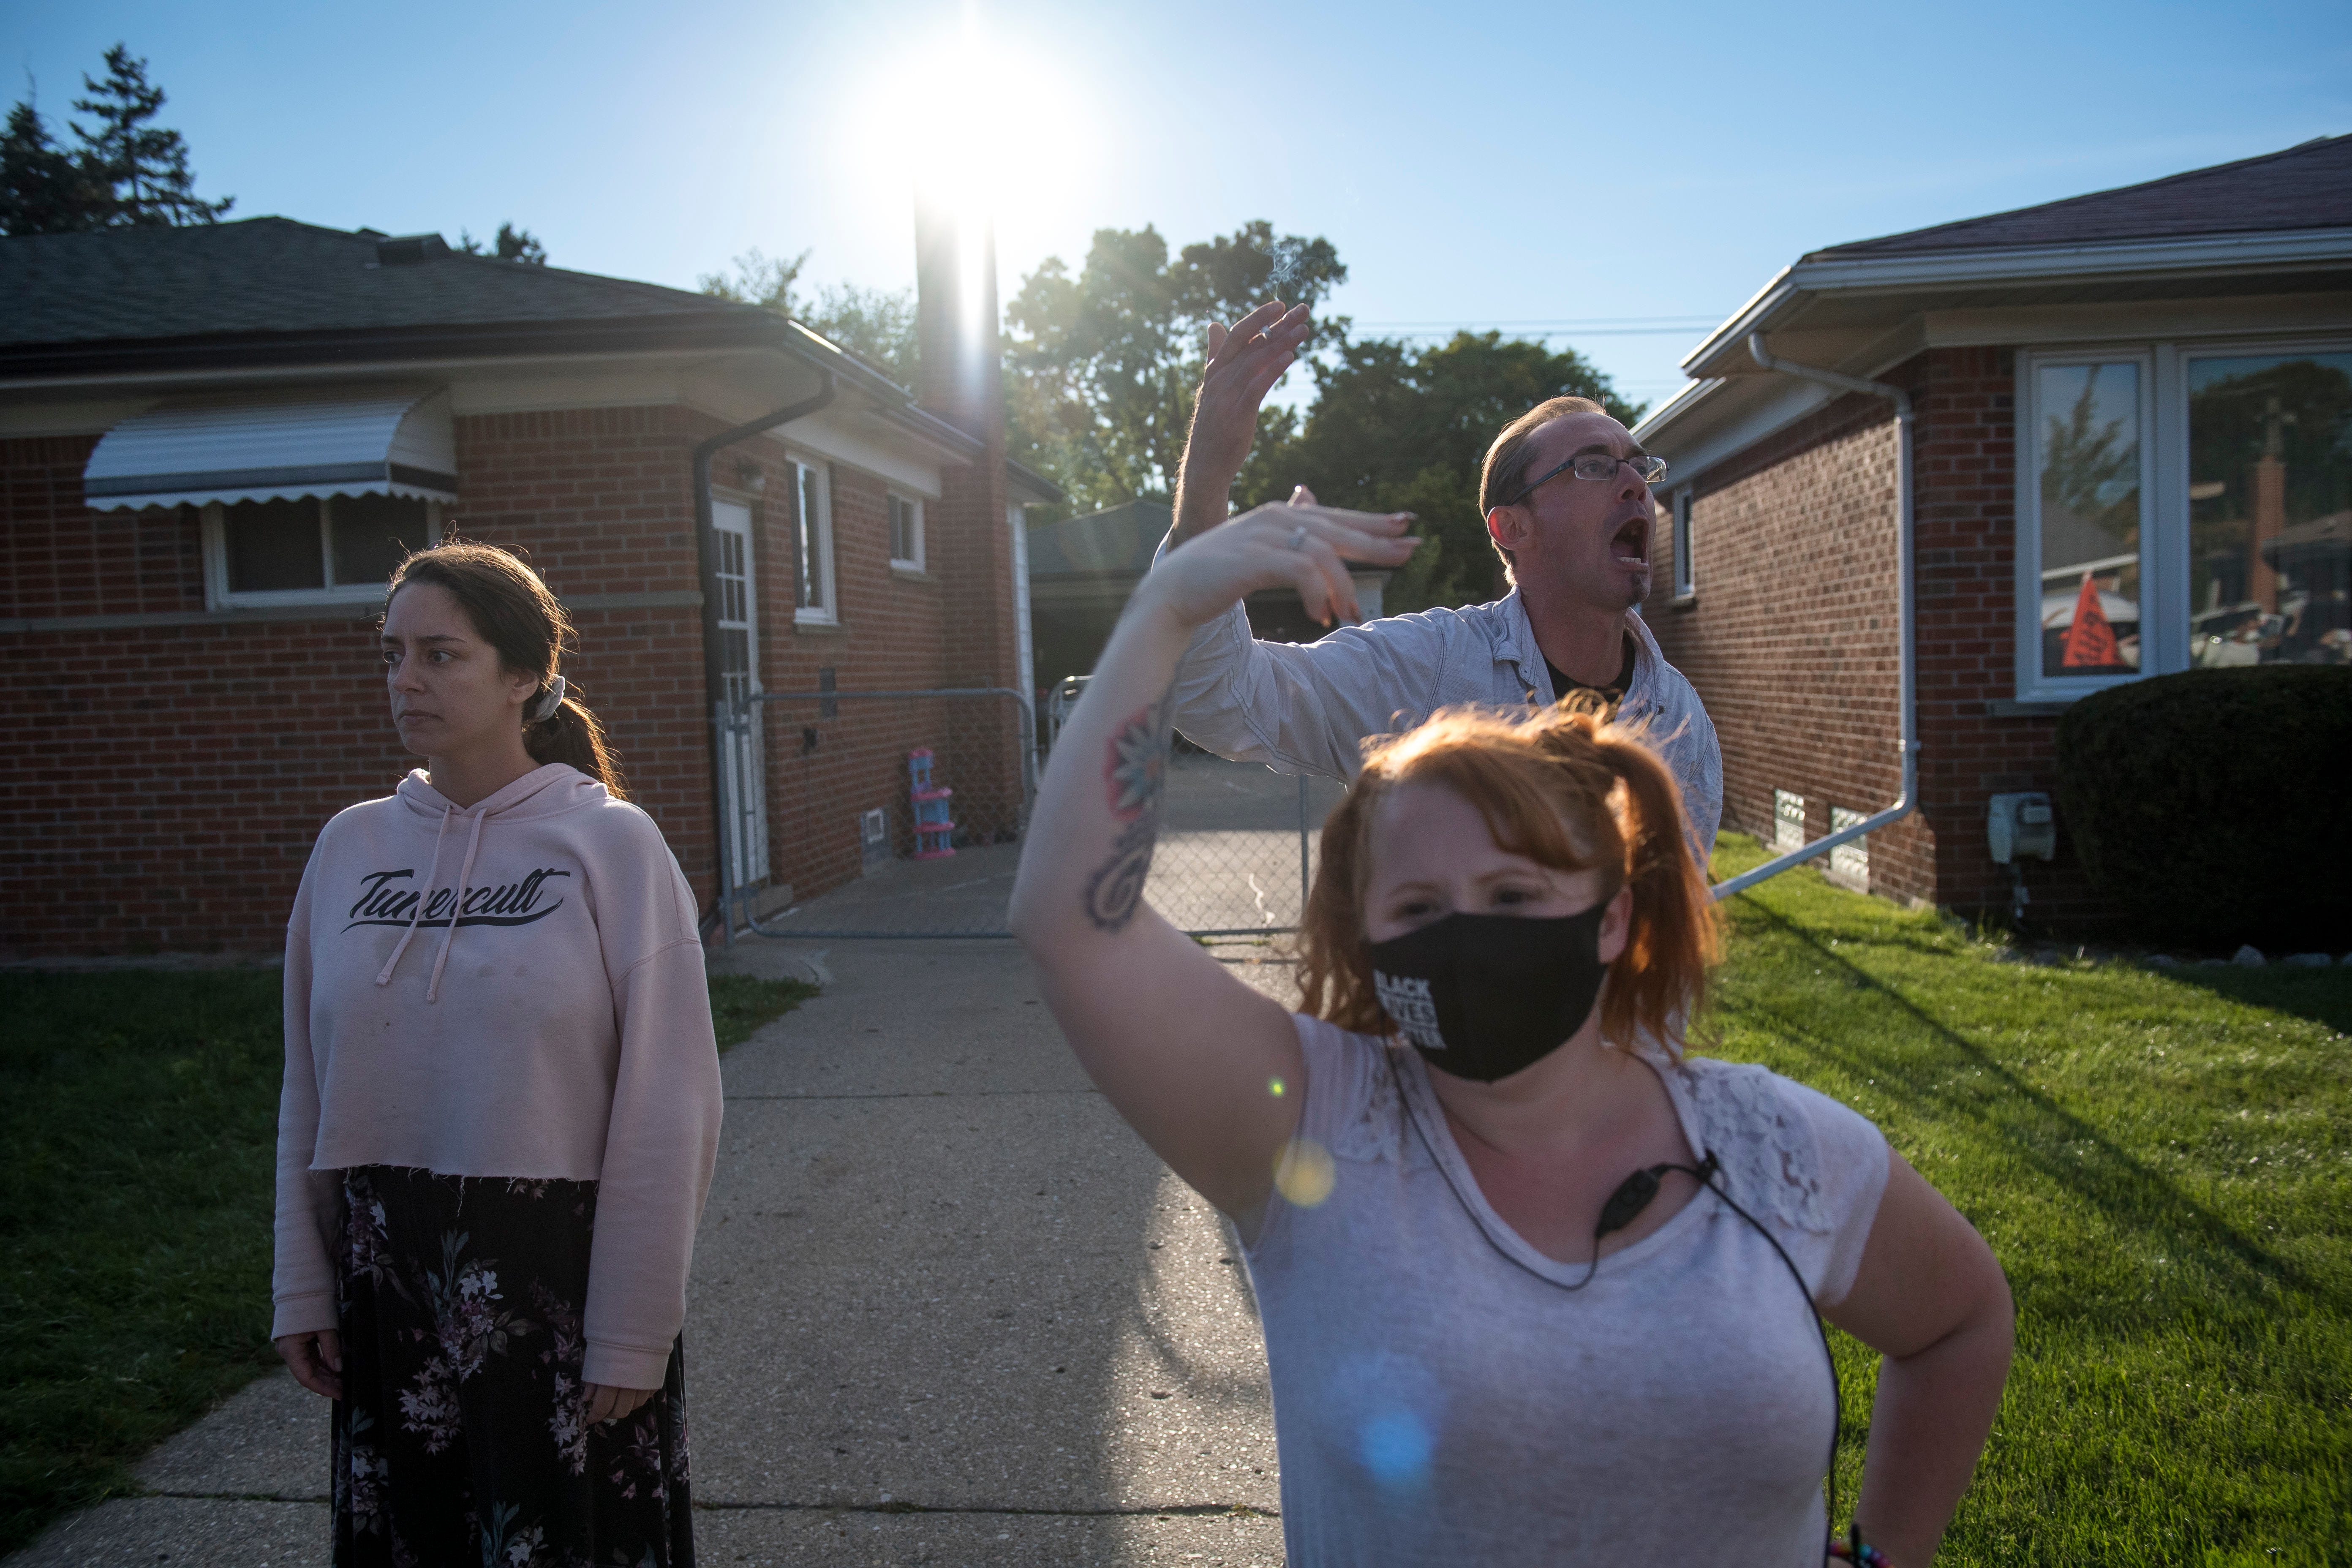 A Warren homeowner yells at protesters during the March Against Racism in Warren on Sept. 19, 2020. The march in Warren occurred in response to what the city called hate crimes that terrorized residents Candace Hall, her husband Eddie and their two children.